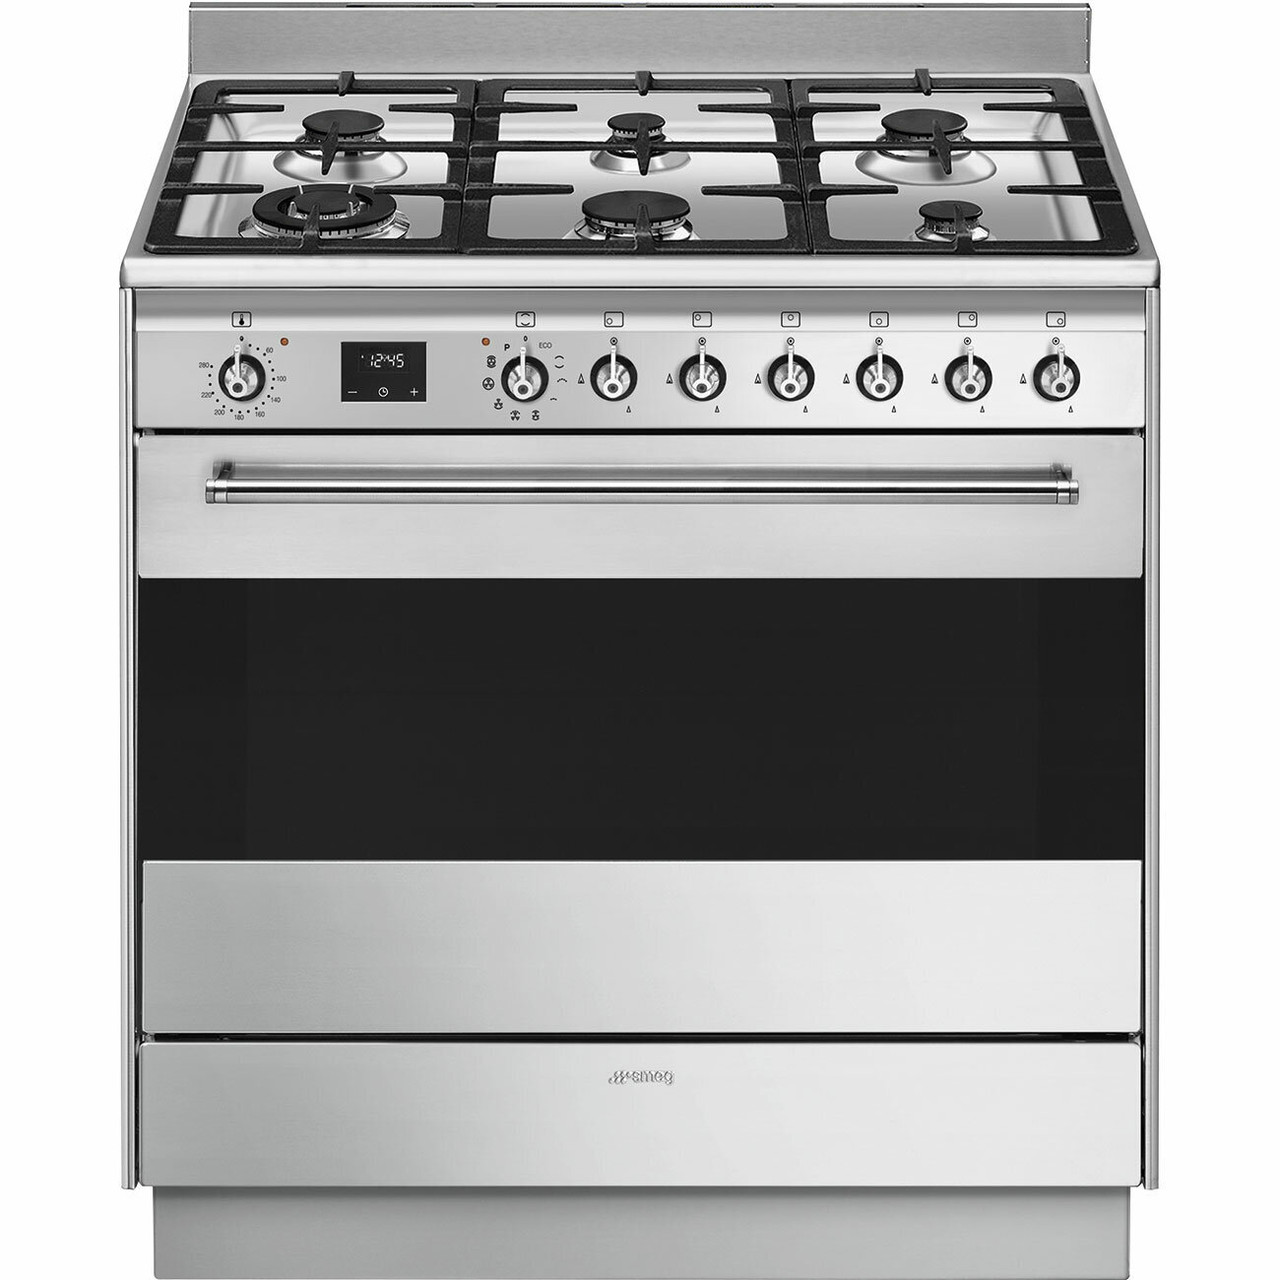 FSP9610X1 - Smeg 90cm Dual Fuel Freestanding Oven/Stove - Stainless Steel